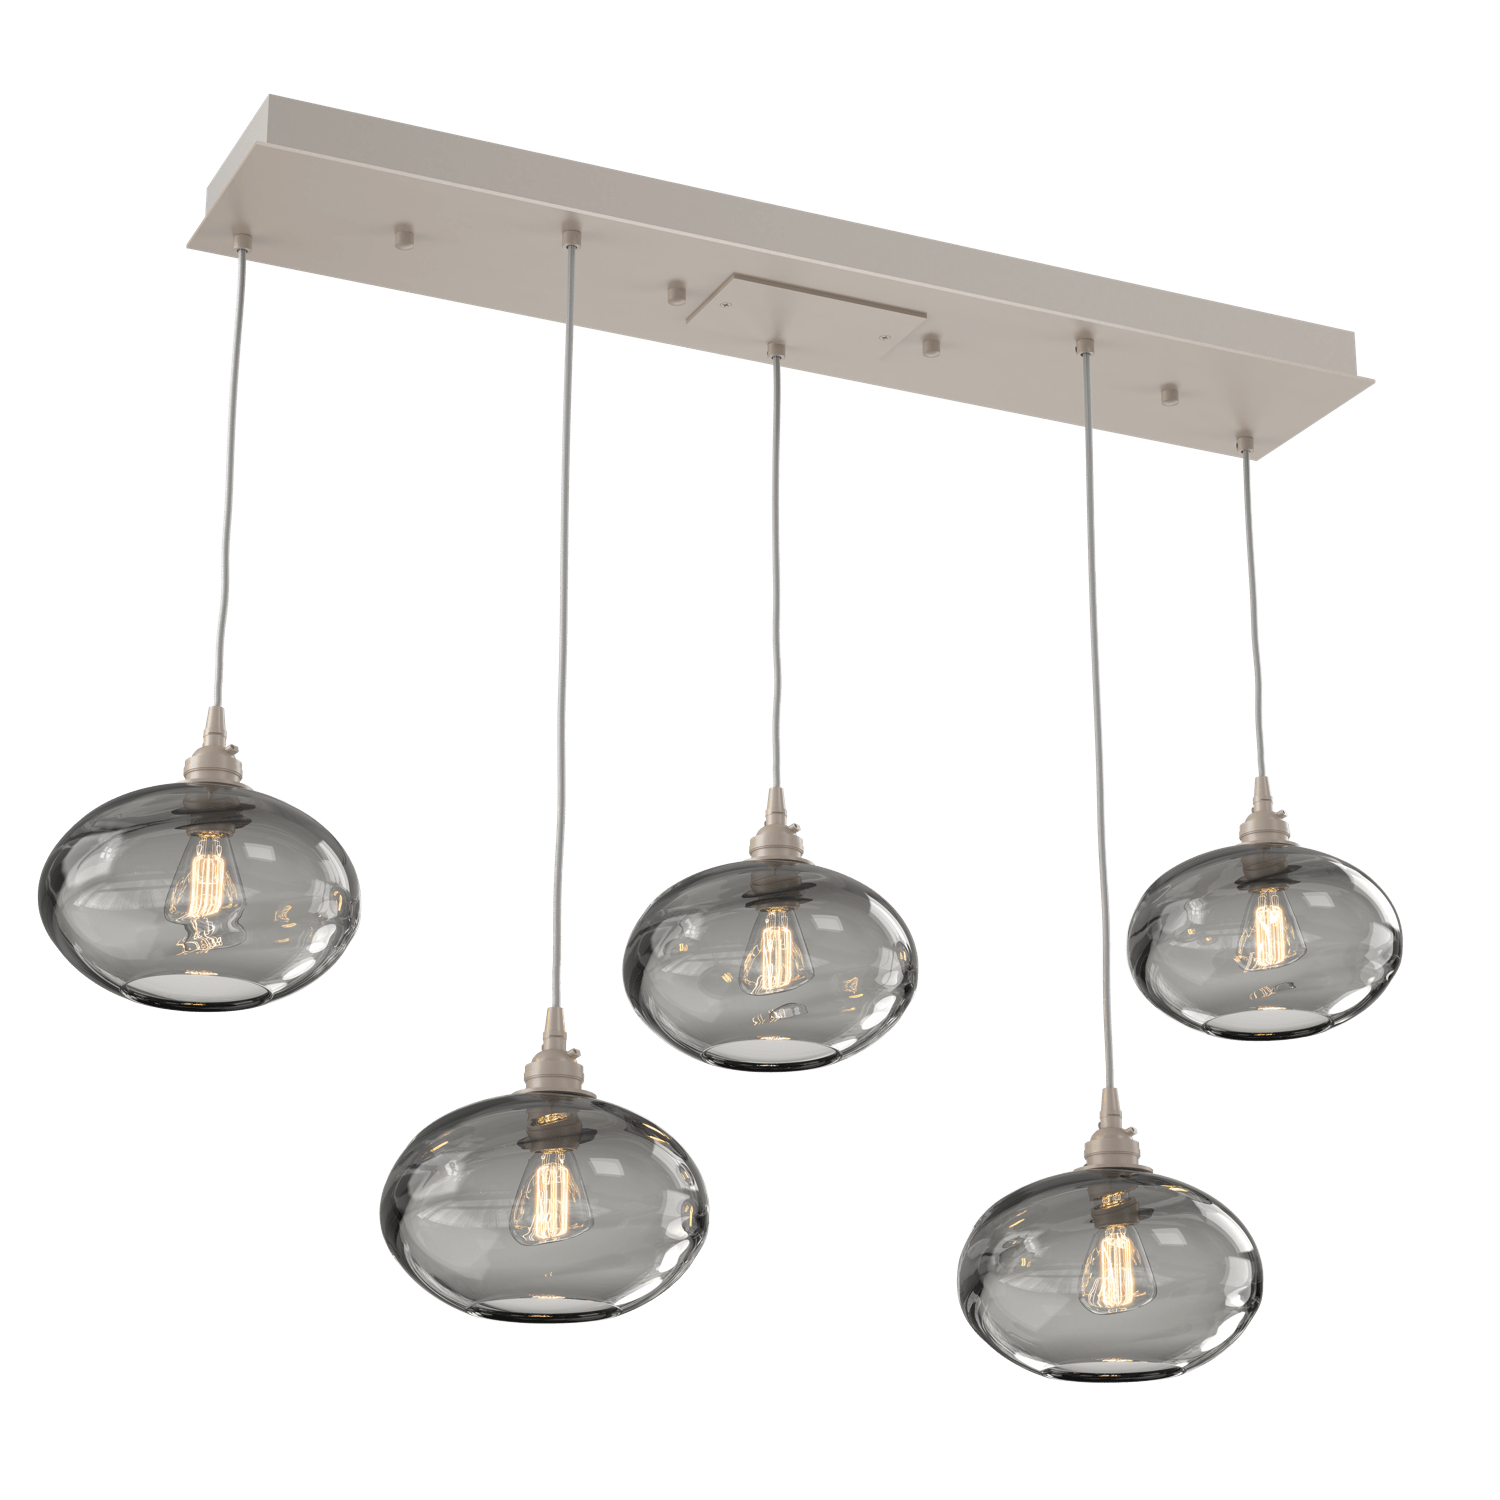 PLB0036-05-BS-OS-Hammerton-Studio-Optic-Blown-Glass-Coppa-5-light-linear-pendant-chandelier-with-metallic-beige-silver-finish-and-optic-smoke-blown-glass-shades-and-incandescent-lamping